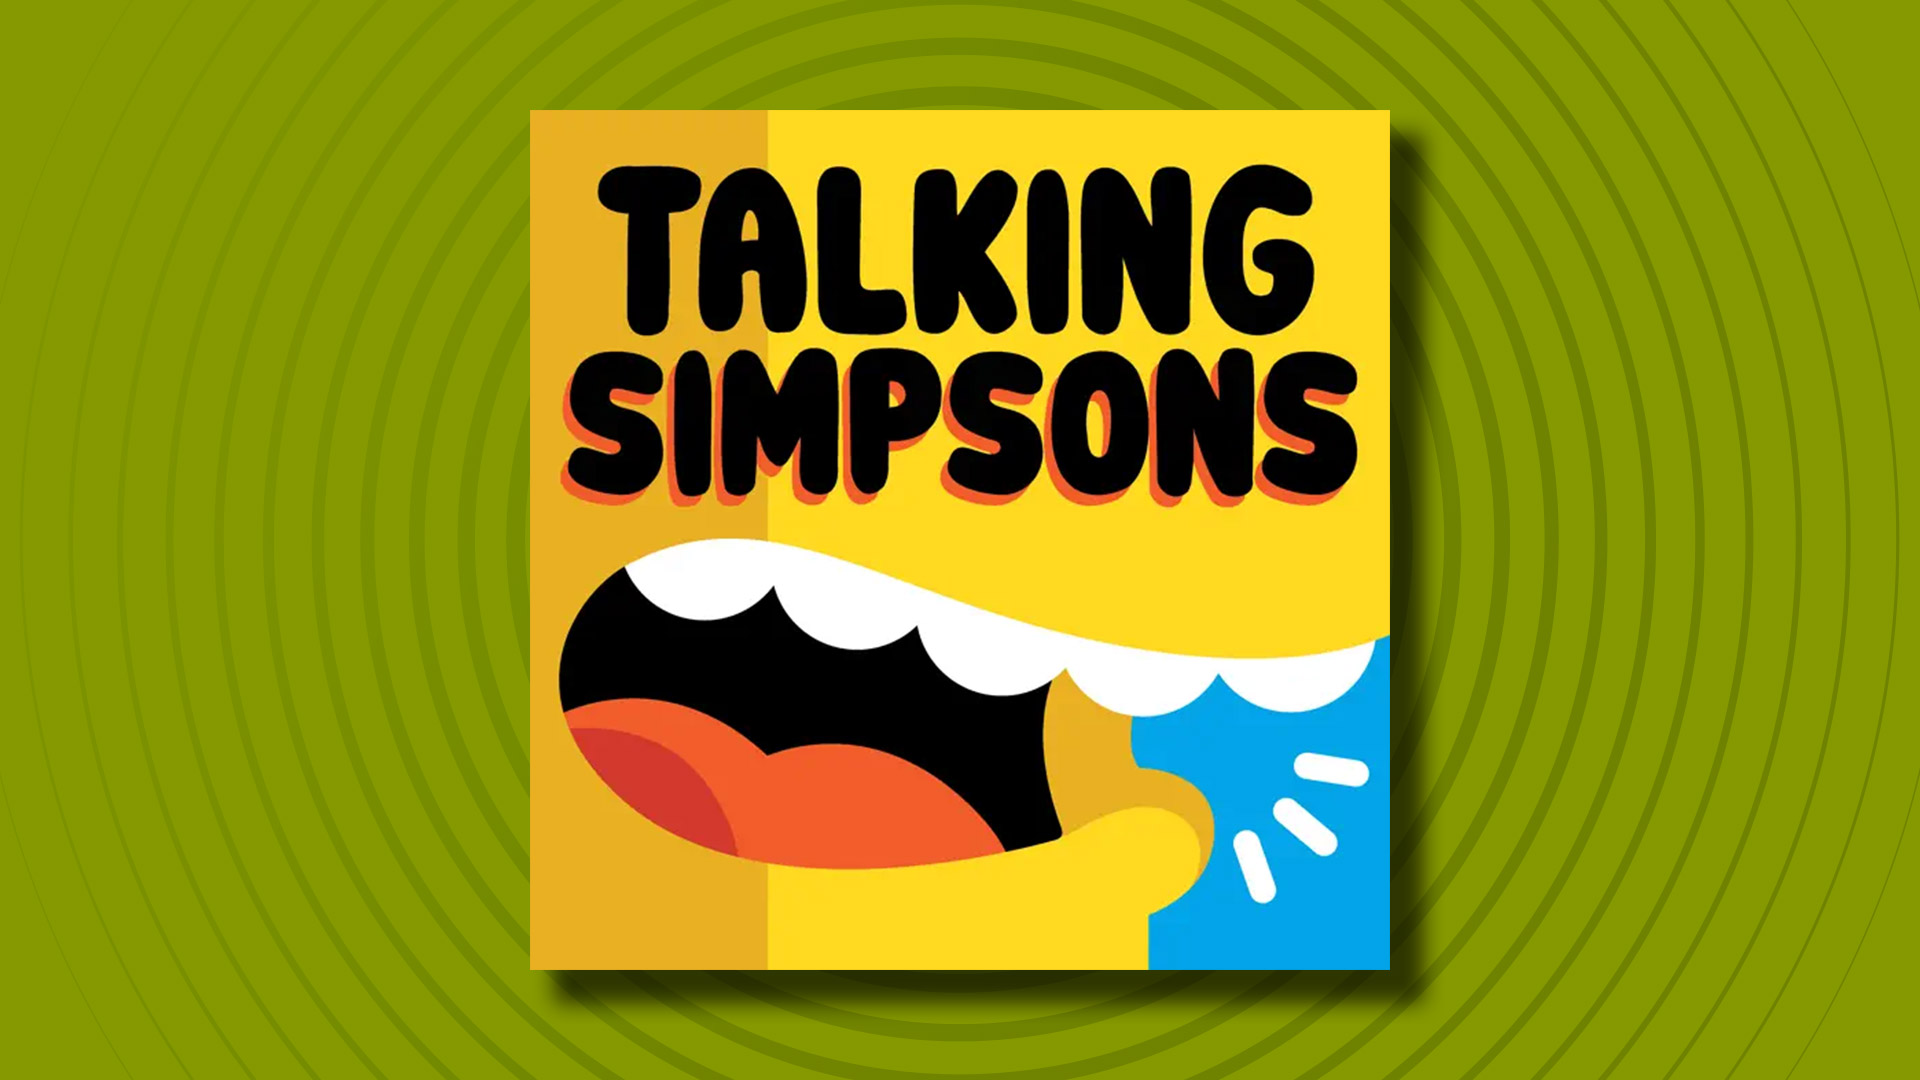 The logo of the Talking Simpsons podcast on a green background